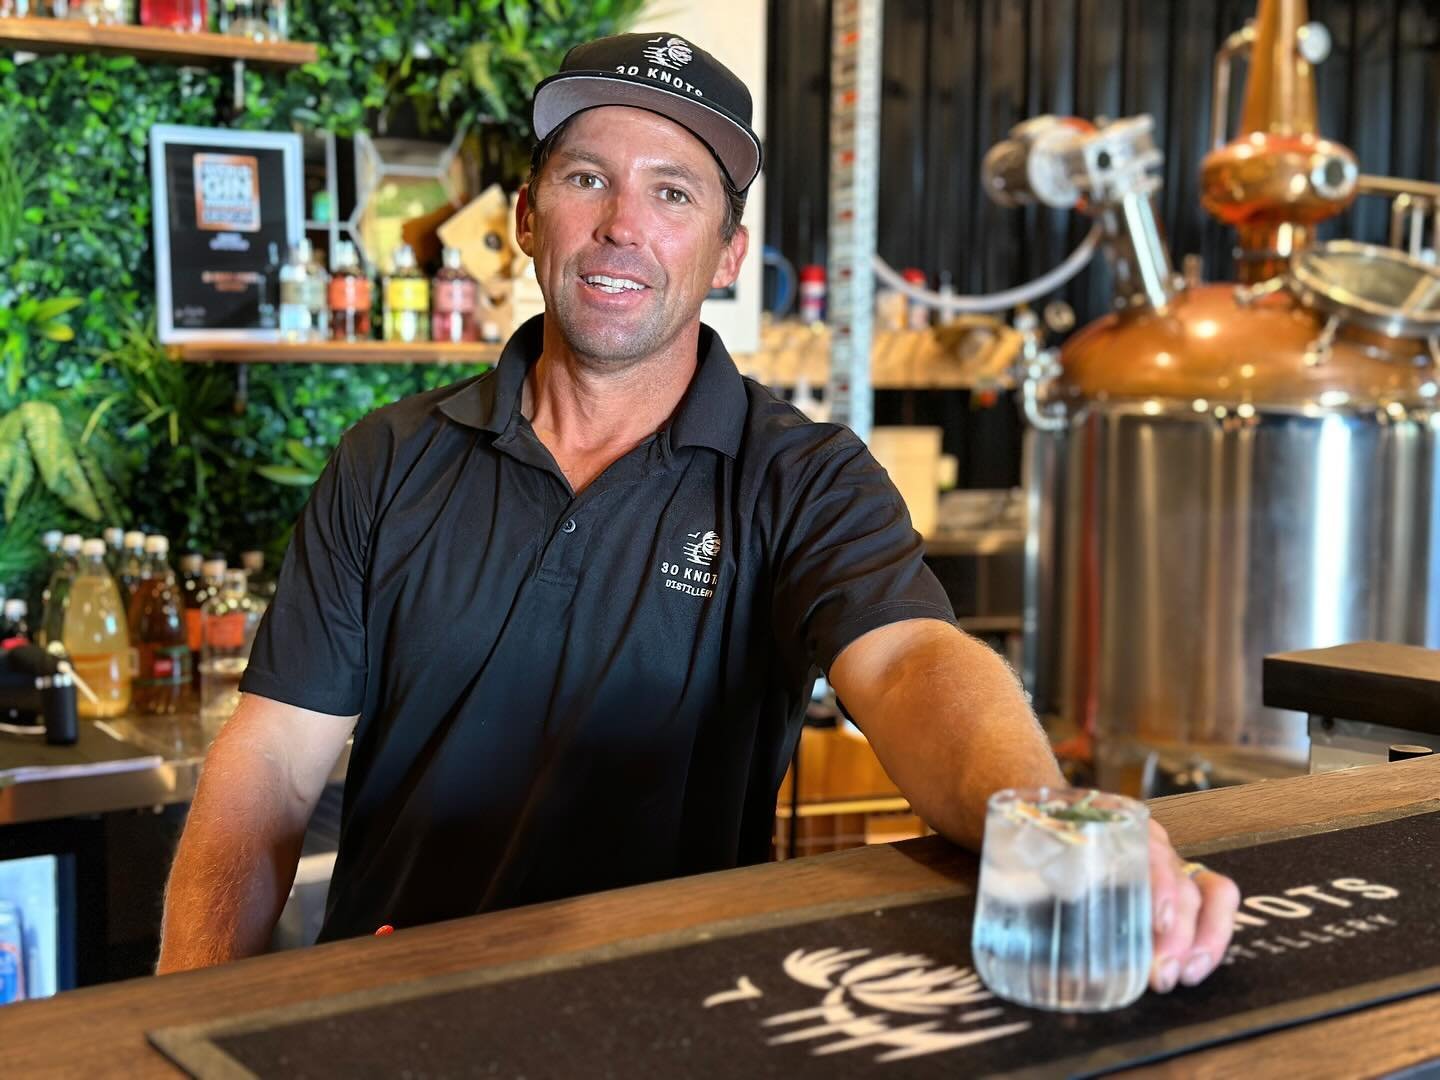 Look who&rsquo;s back behind the bar! It&rsquo;s been a long 8 weeks with Muz working his other job, crayfishing, at the Abrolhos islands to help support our small business. For now, balancing multiple jobs is what it takes to make our dream a realit